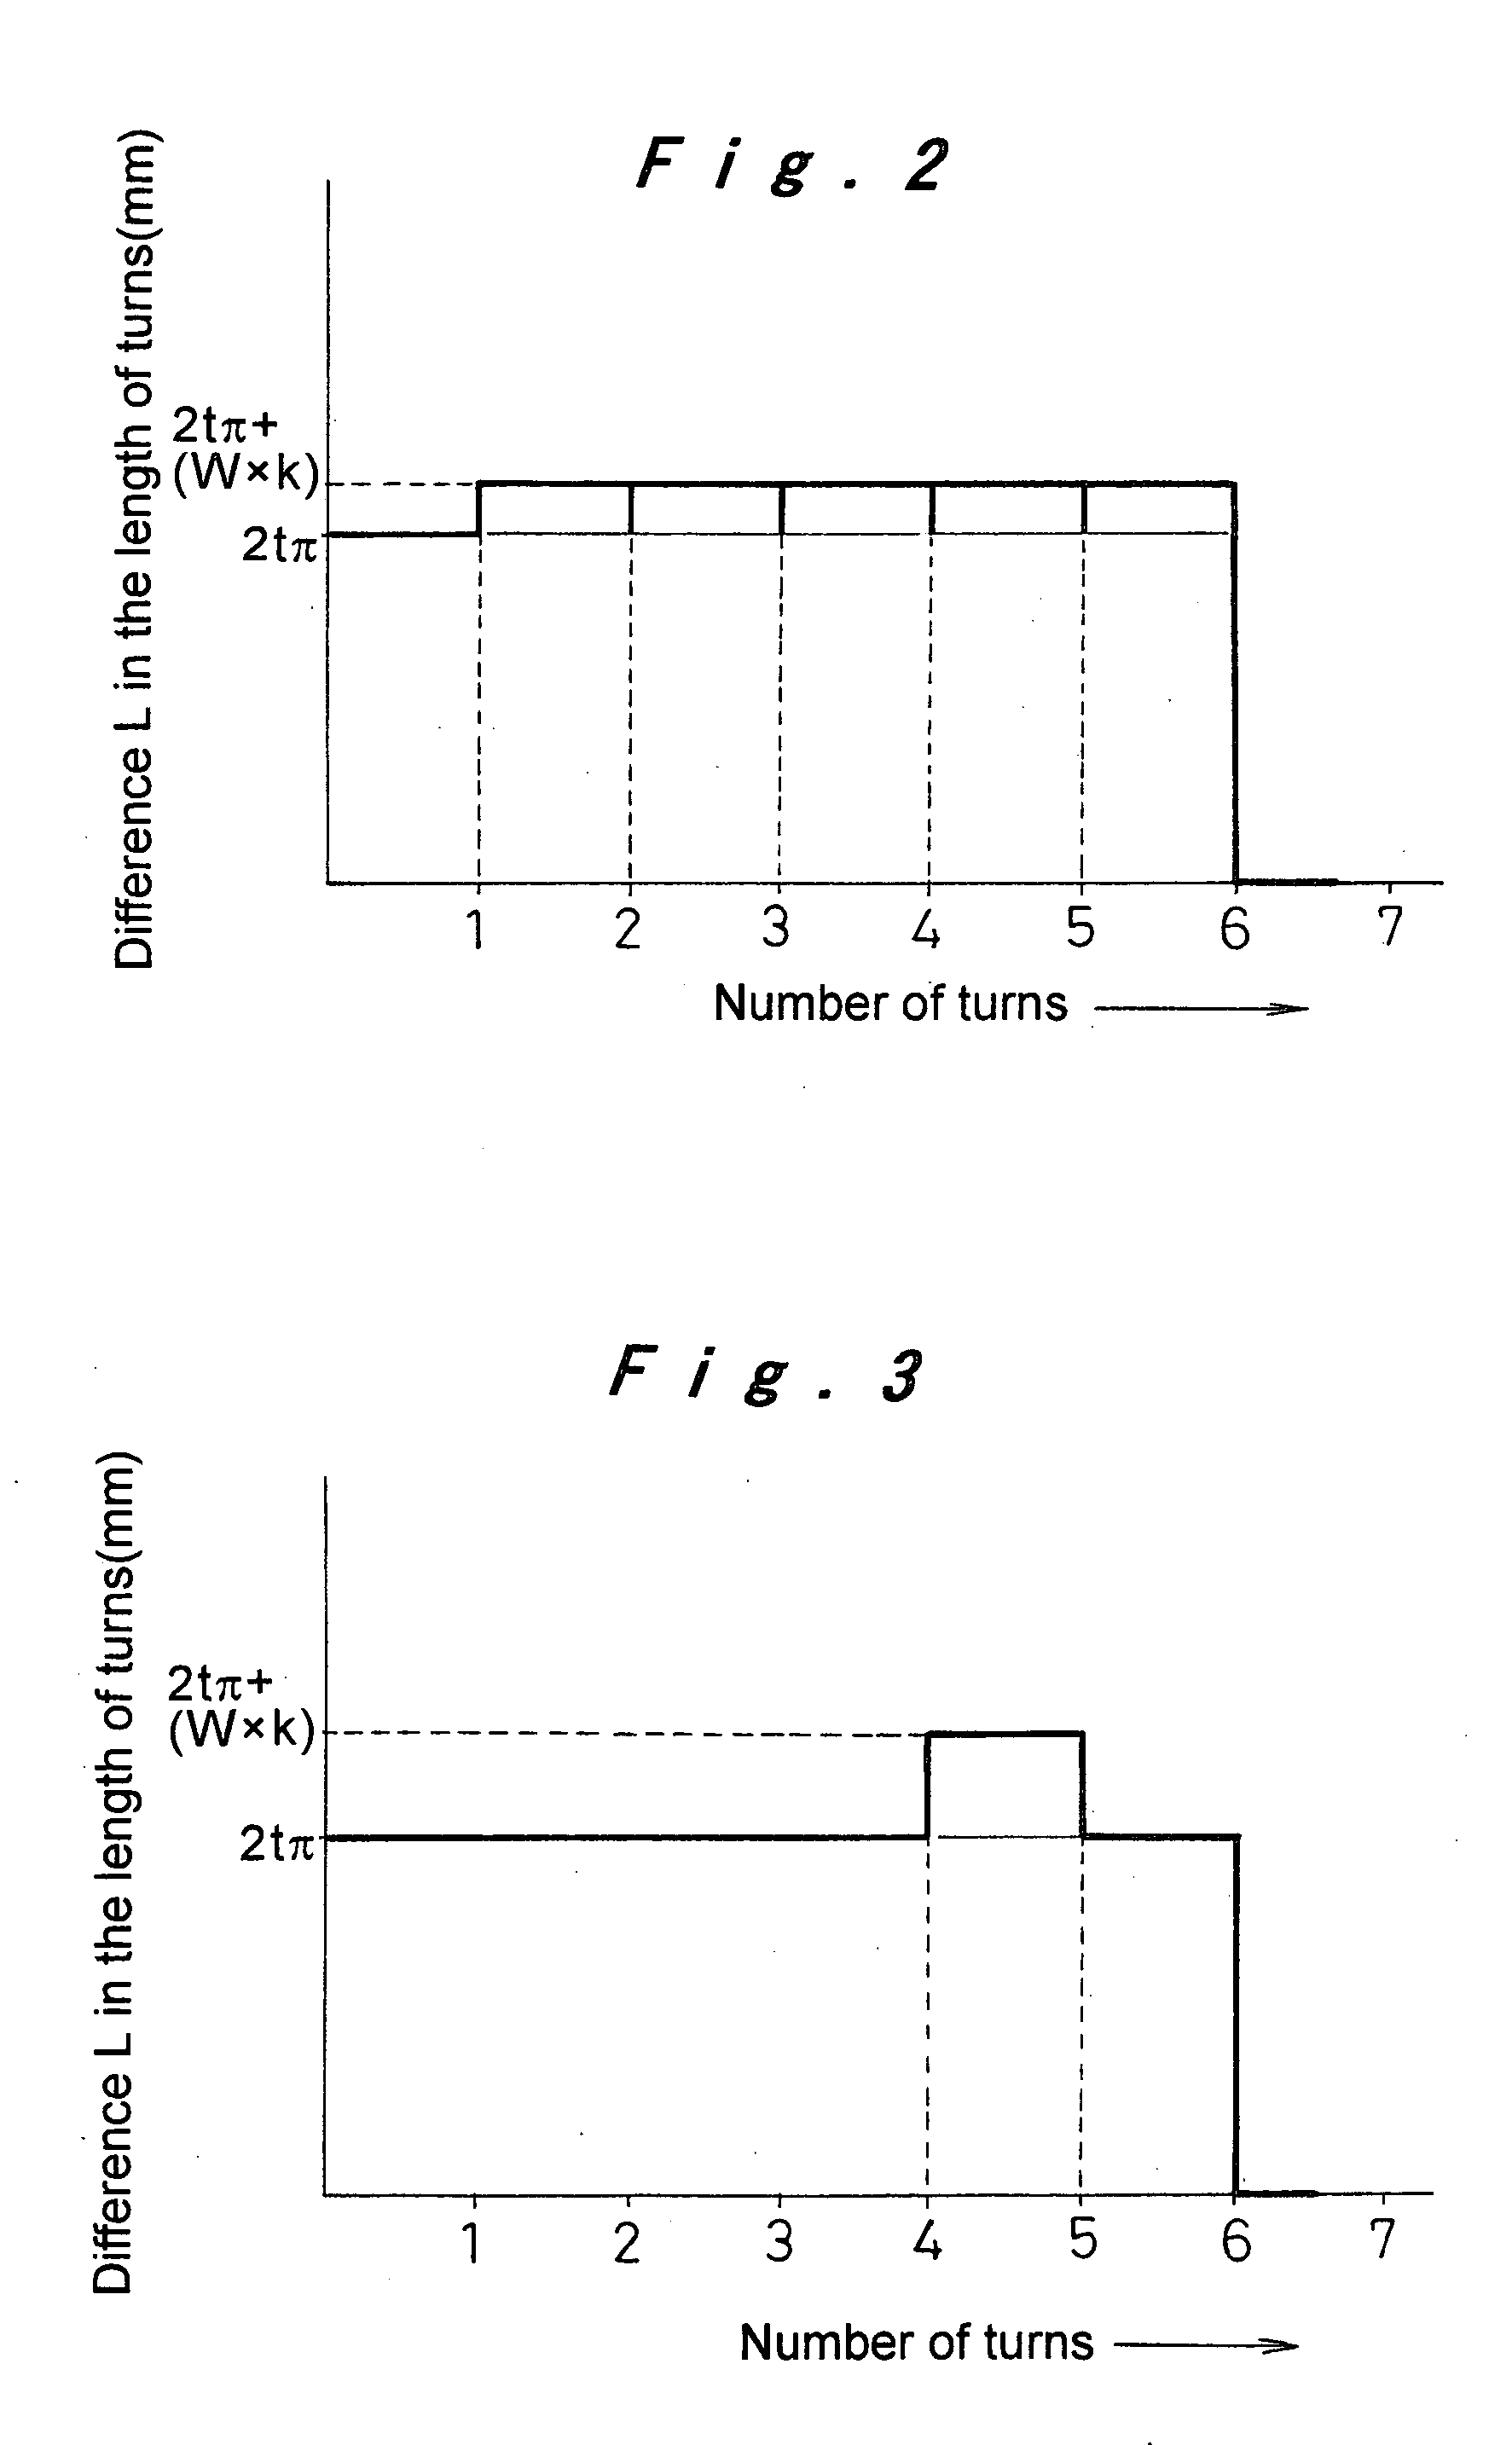 Battery and method for manufacturing spiral electrode group for use therein